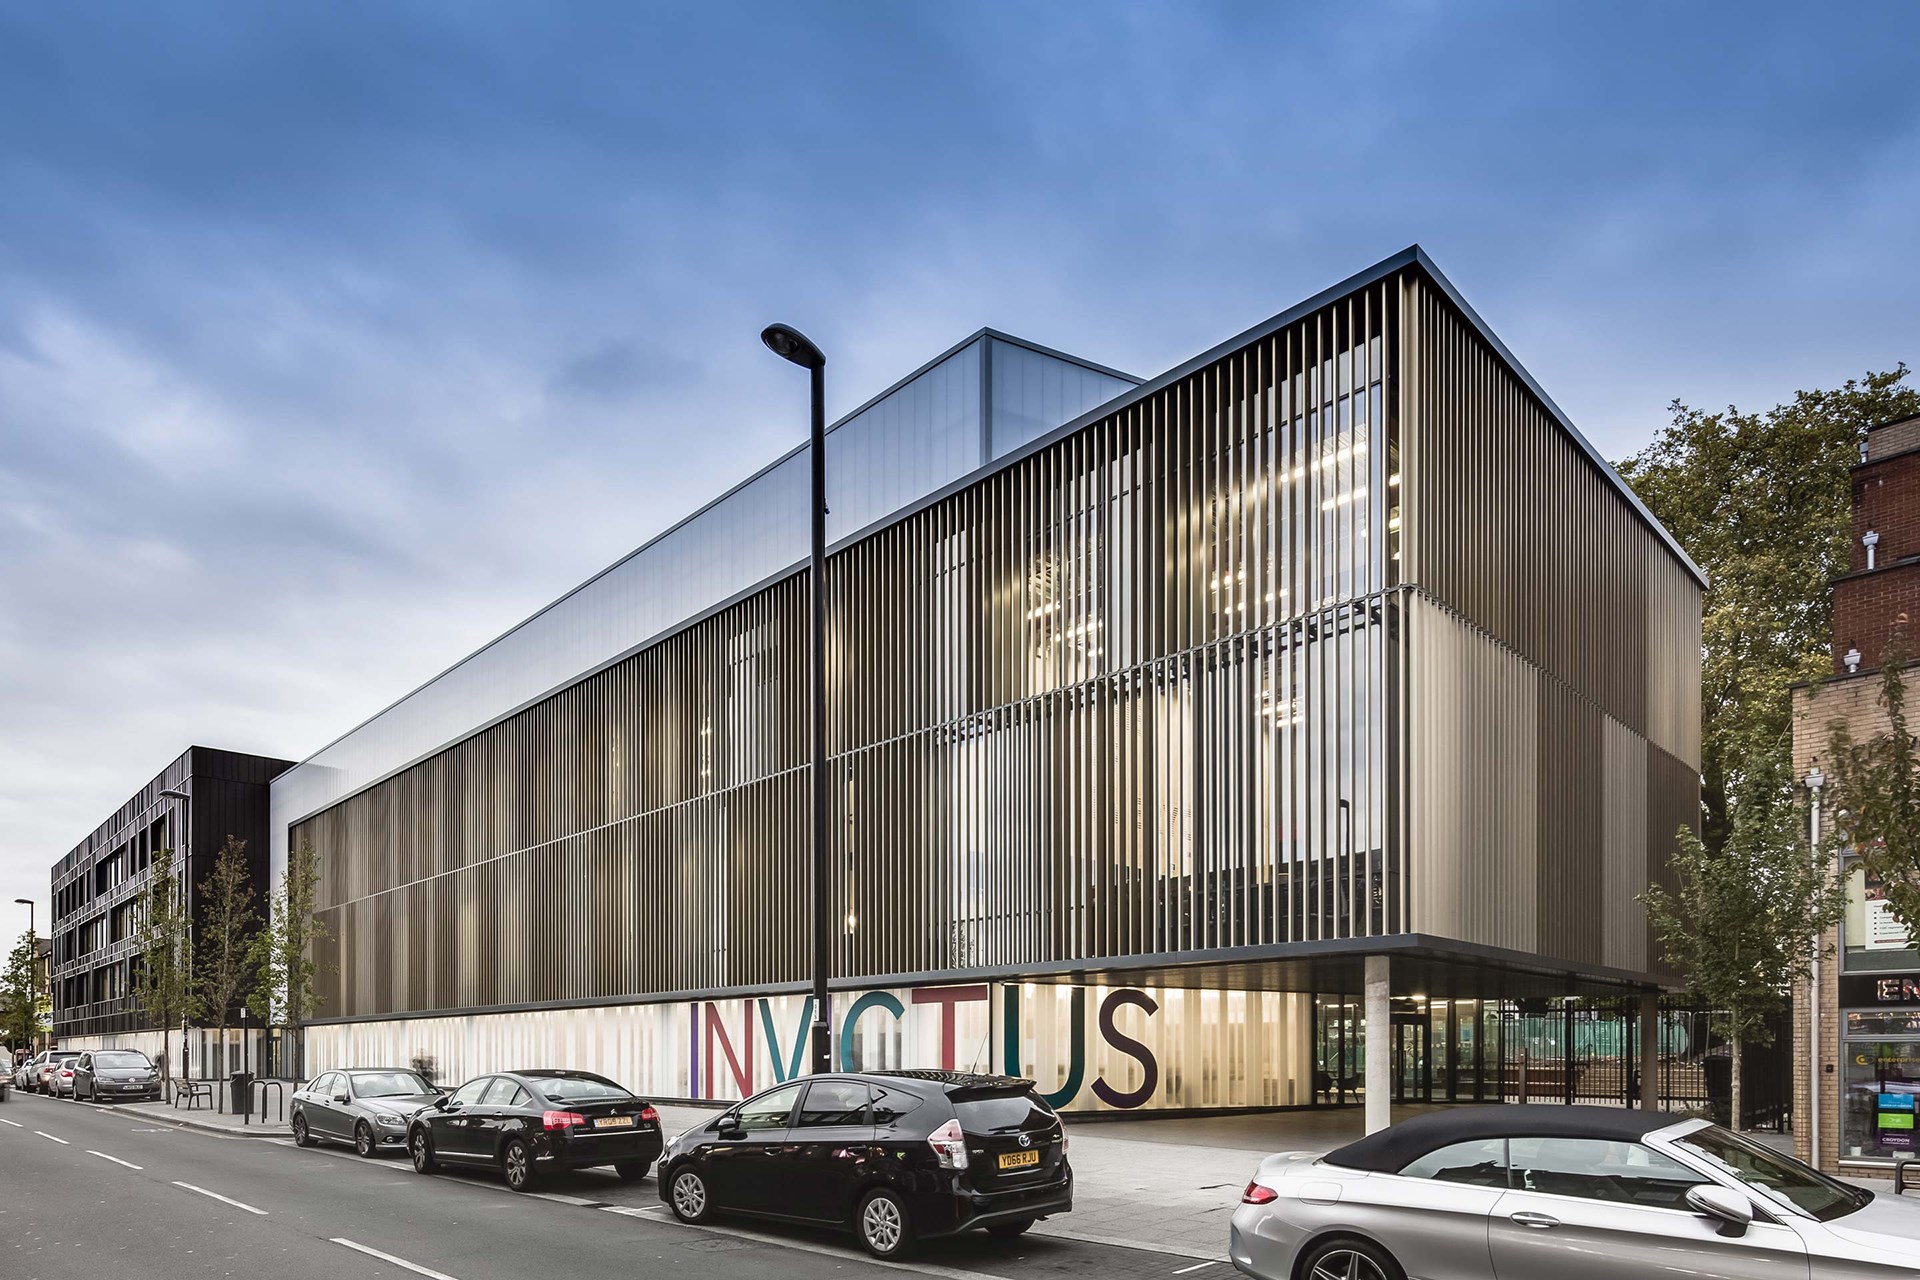 Harris Invictus Academy Is A Finalist In Building Magazine S Project Of The Year Award